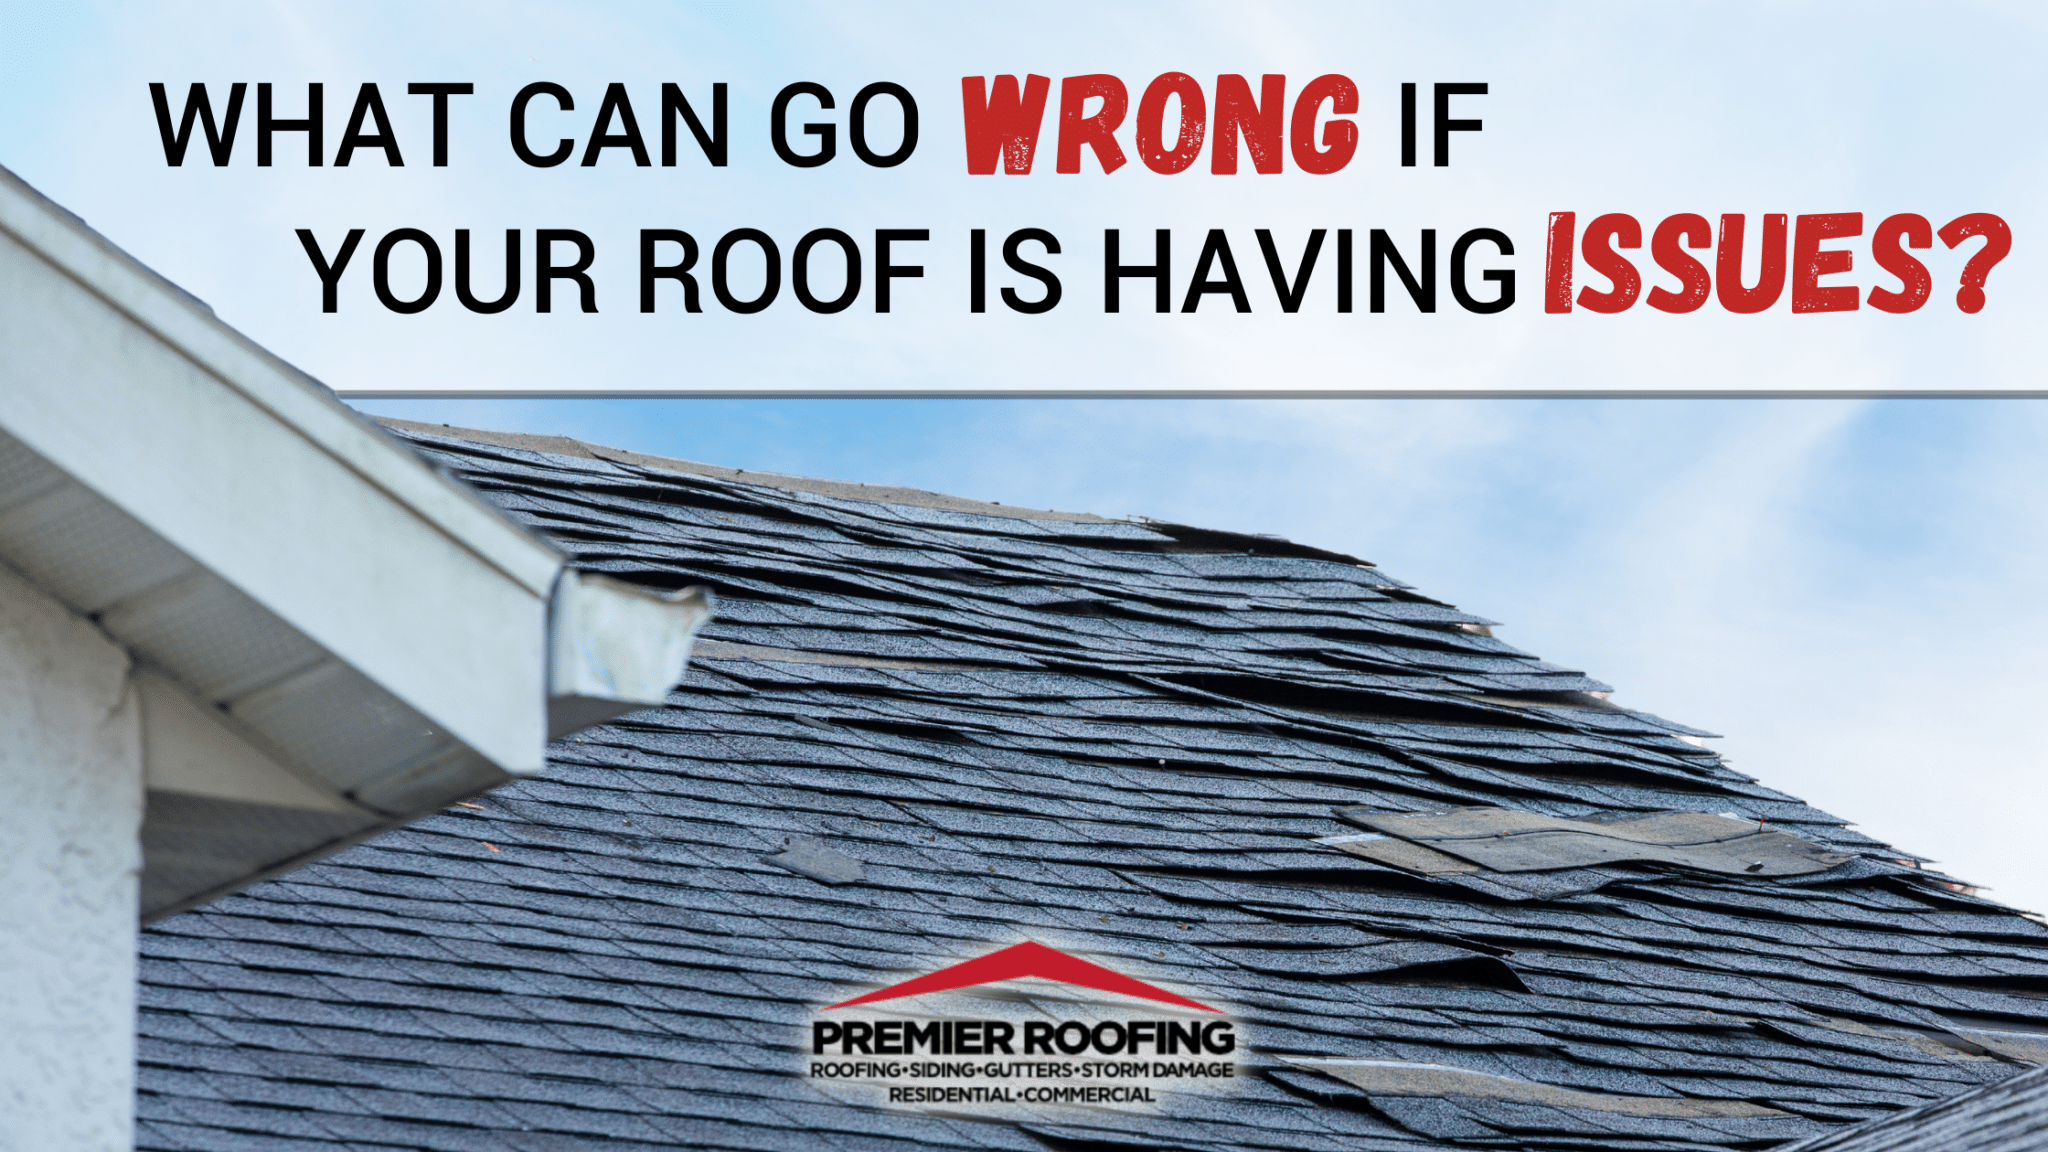 What Can Go Wrong If Your Roof Is Having Issues?